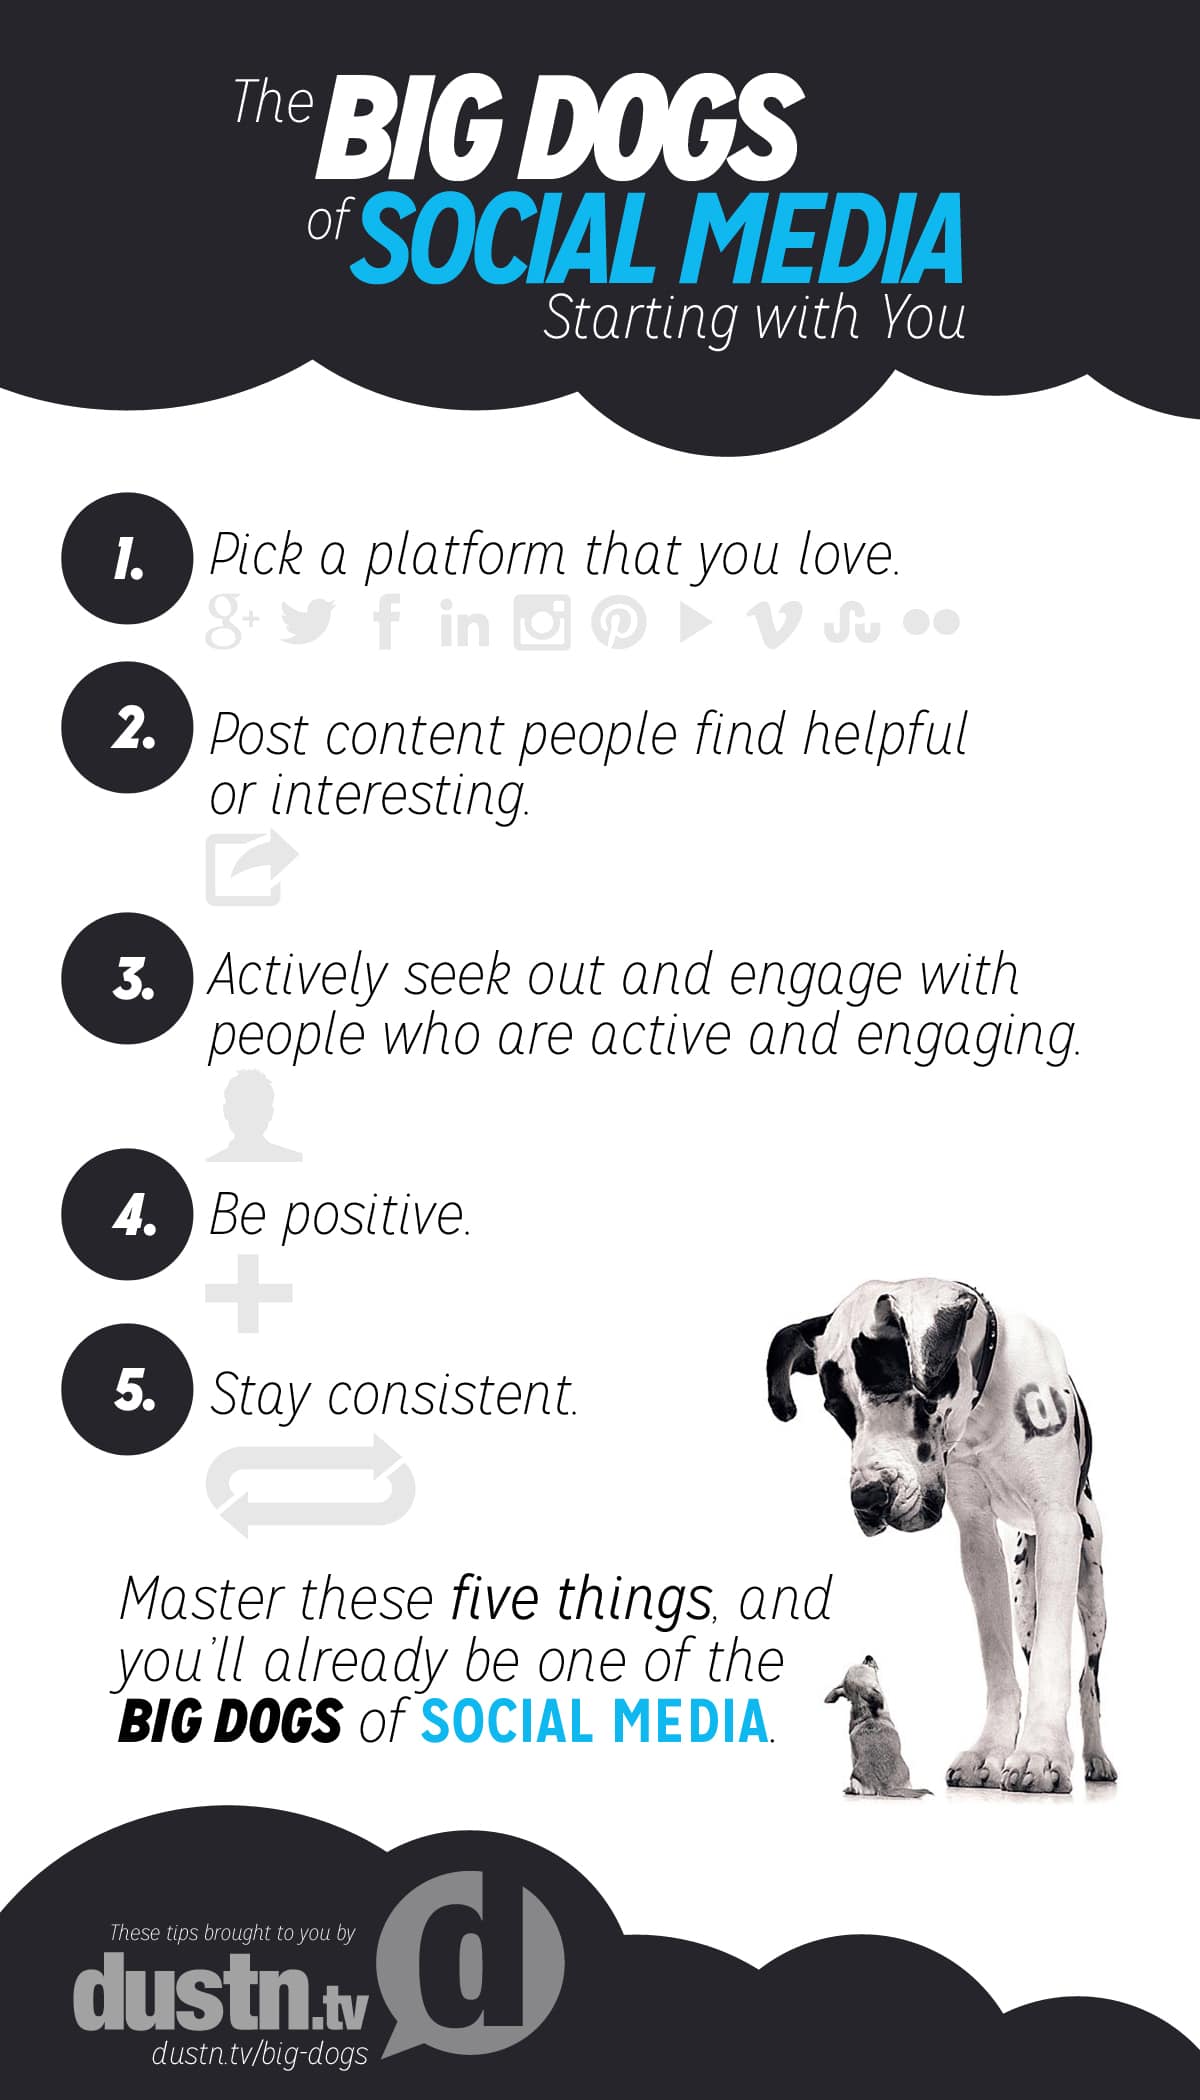 big dogs of social media tips infographic